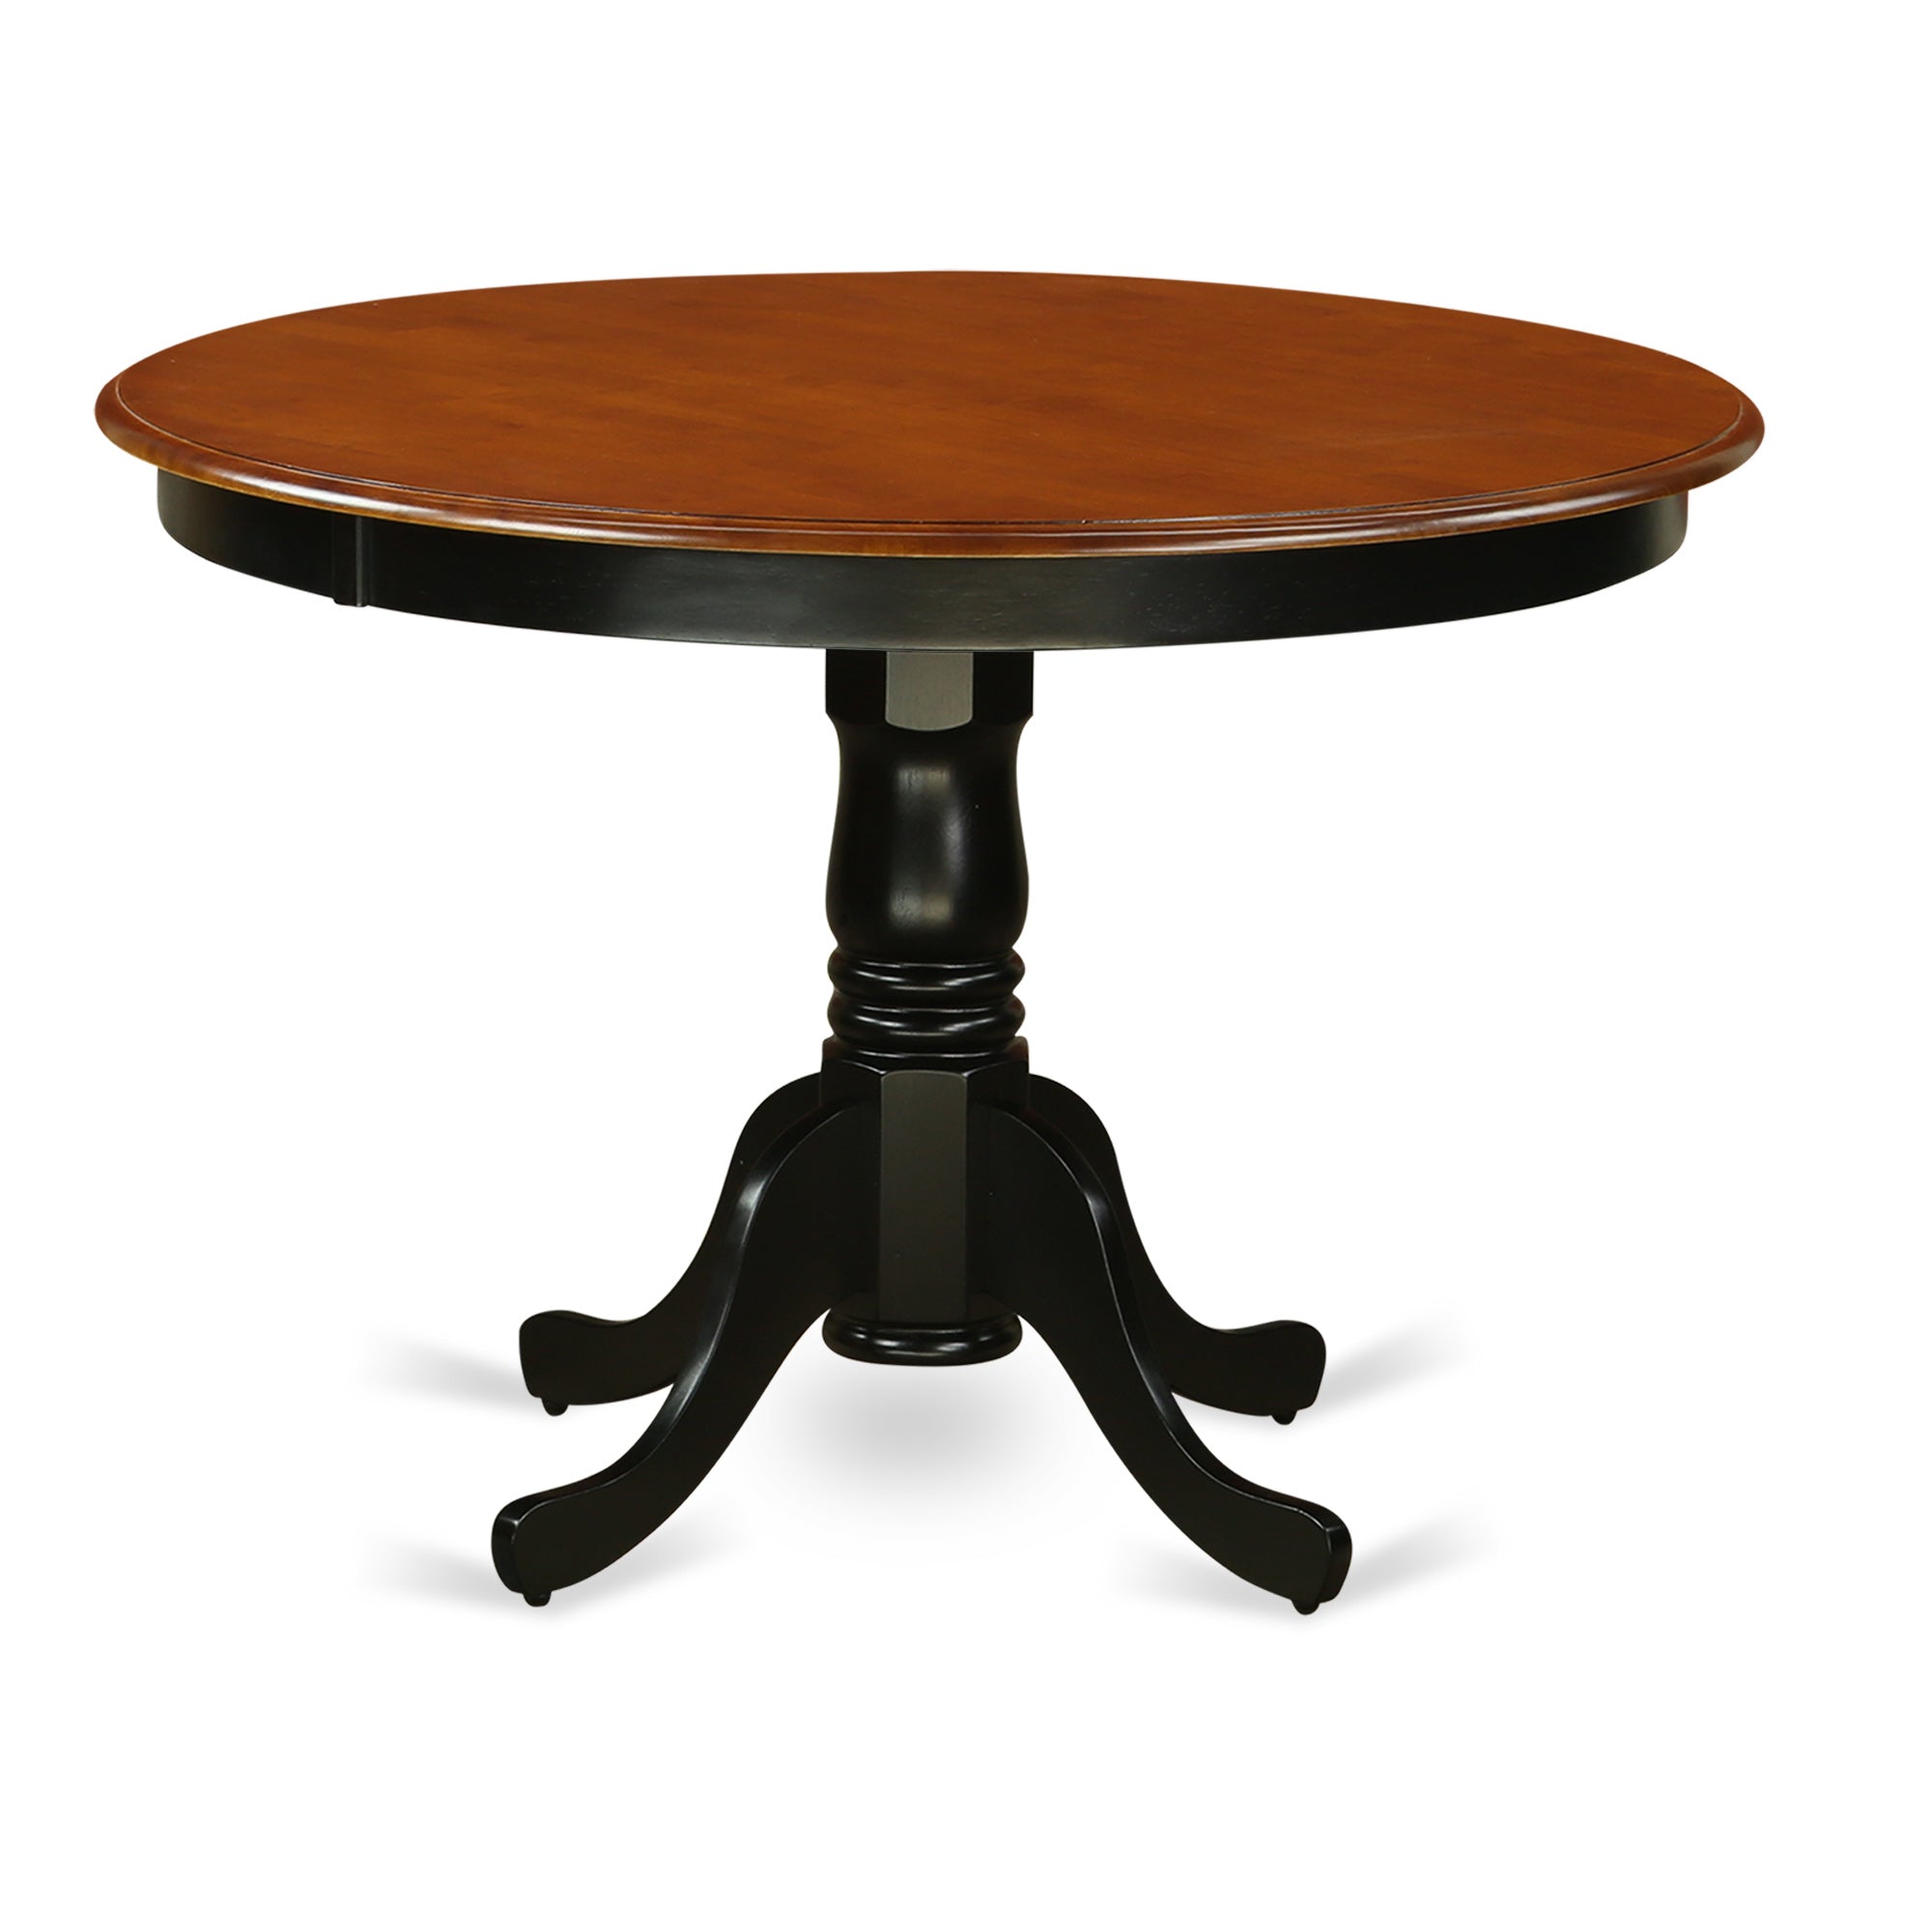 HLAN5-BCH-W 5 Pc set with a Round Dinette Table and 4 Wood Dinette Chairs in Black and Cherry